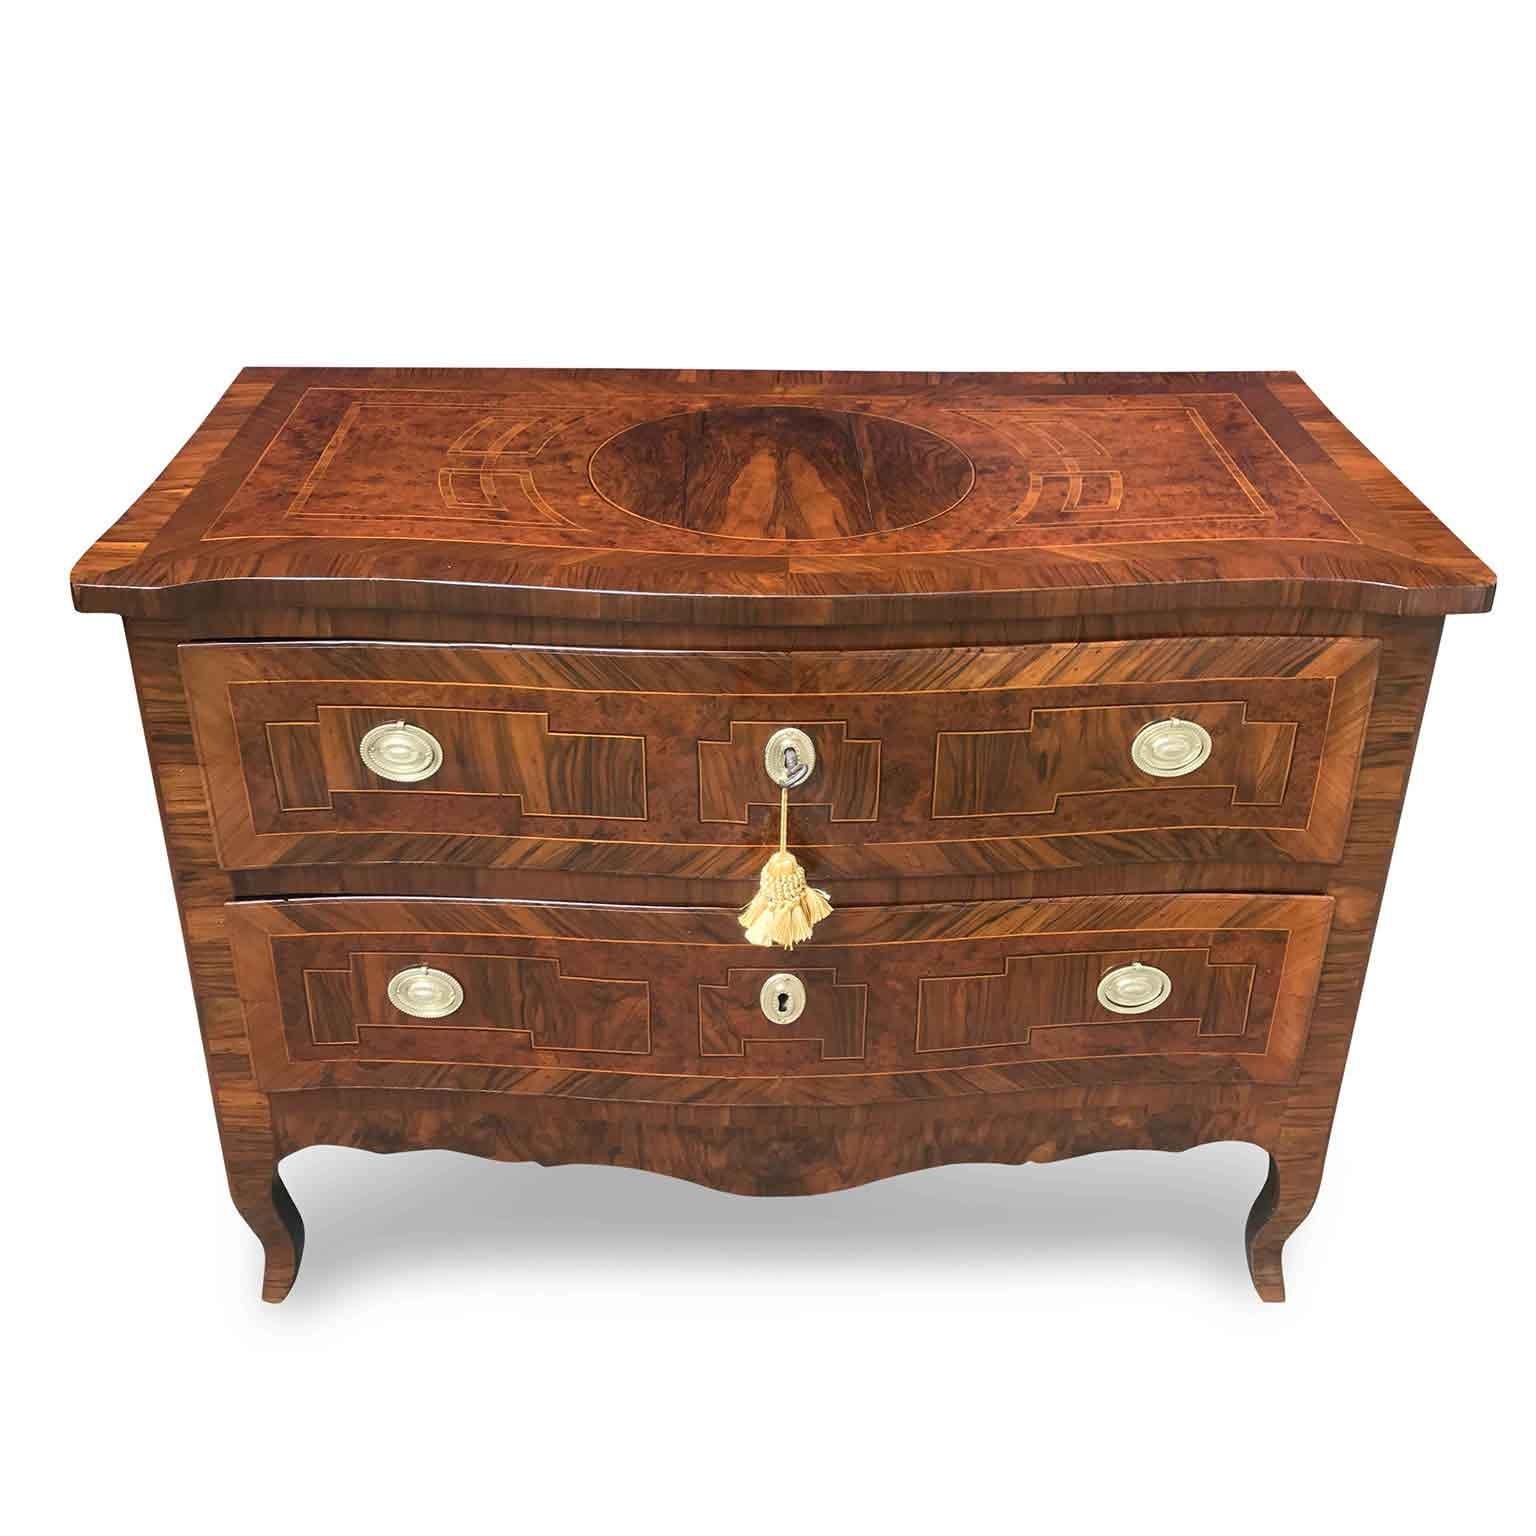 Italian 18th century Louis XV two-drawer commode from Bologna, Emilia Romagna Northern region, a stunning burr walnut and thuya marquetry chest of drawers realized in Italy in the second half of 18th century, in good condition.
Two drawers, front,